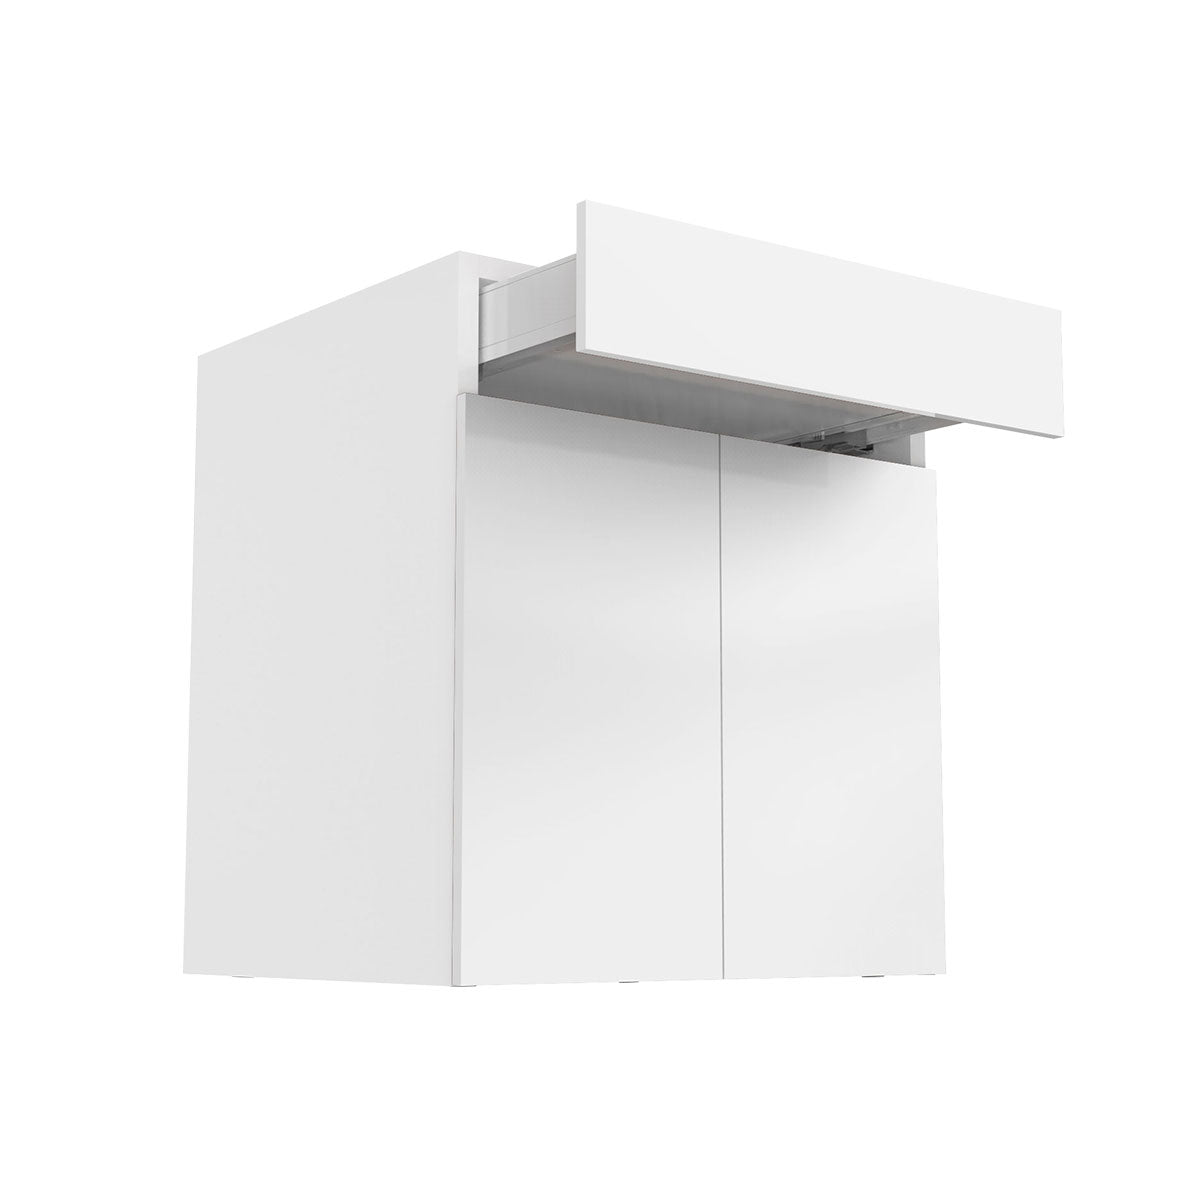 RTA - Glossy White - Double Door Base Cabinets | 27"W x 30"H x 23.8"D